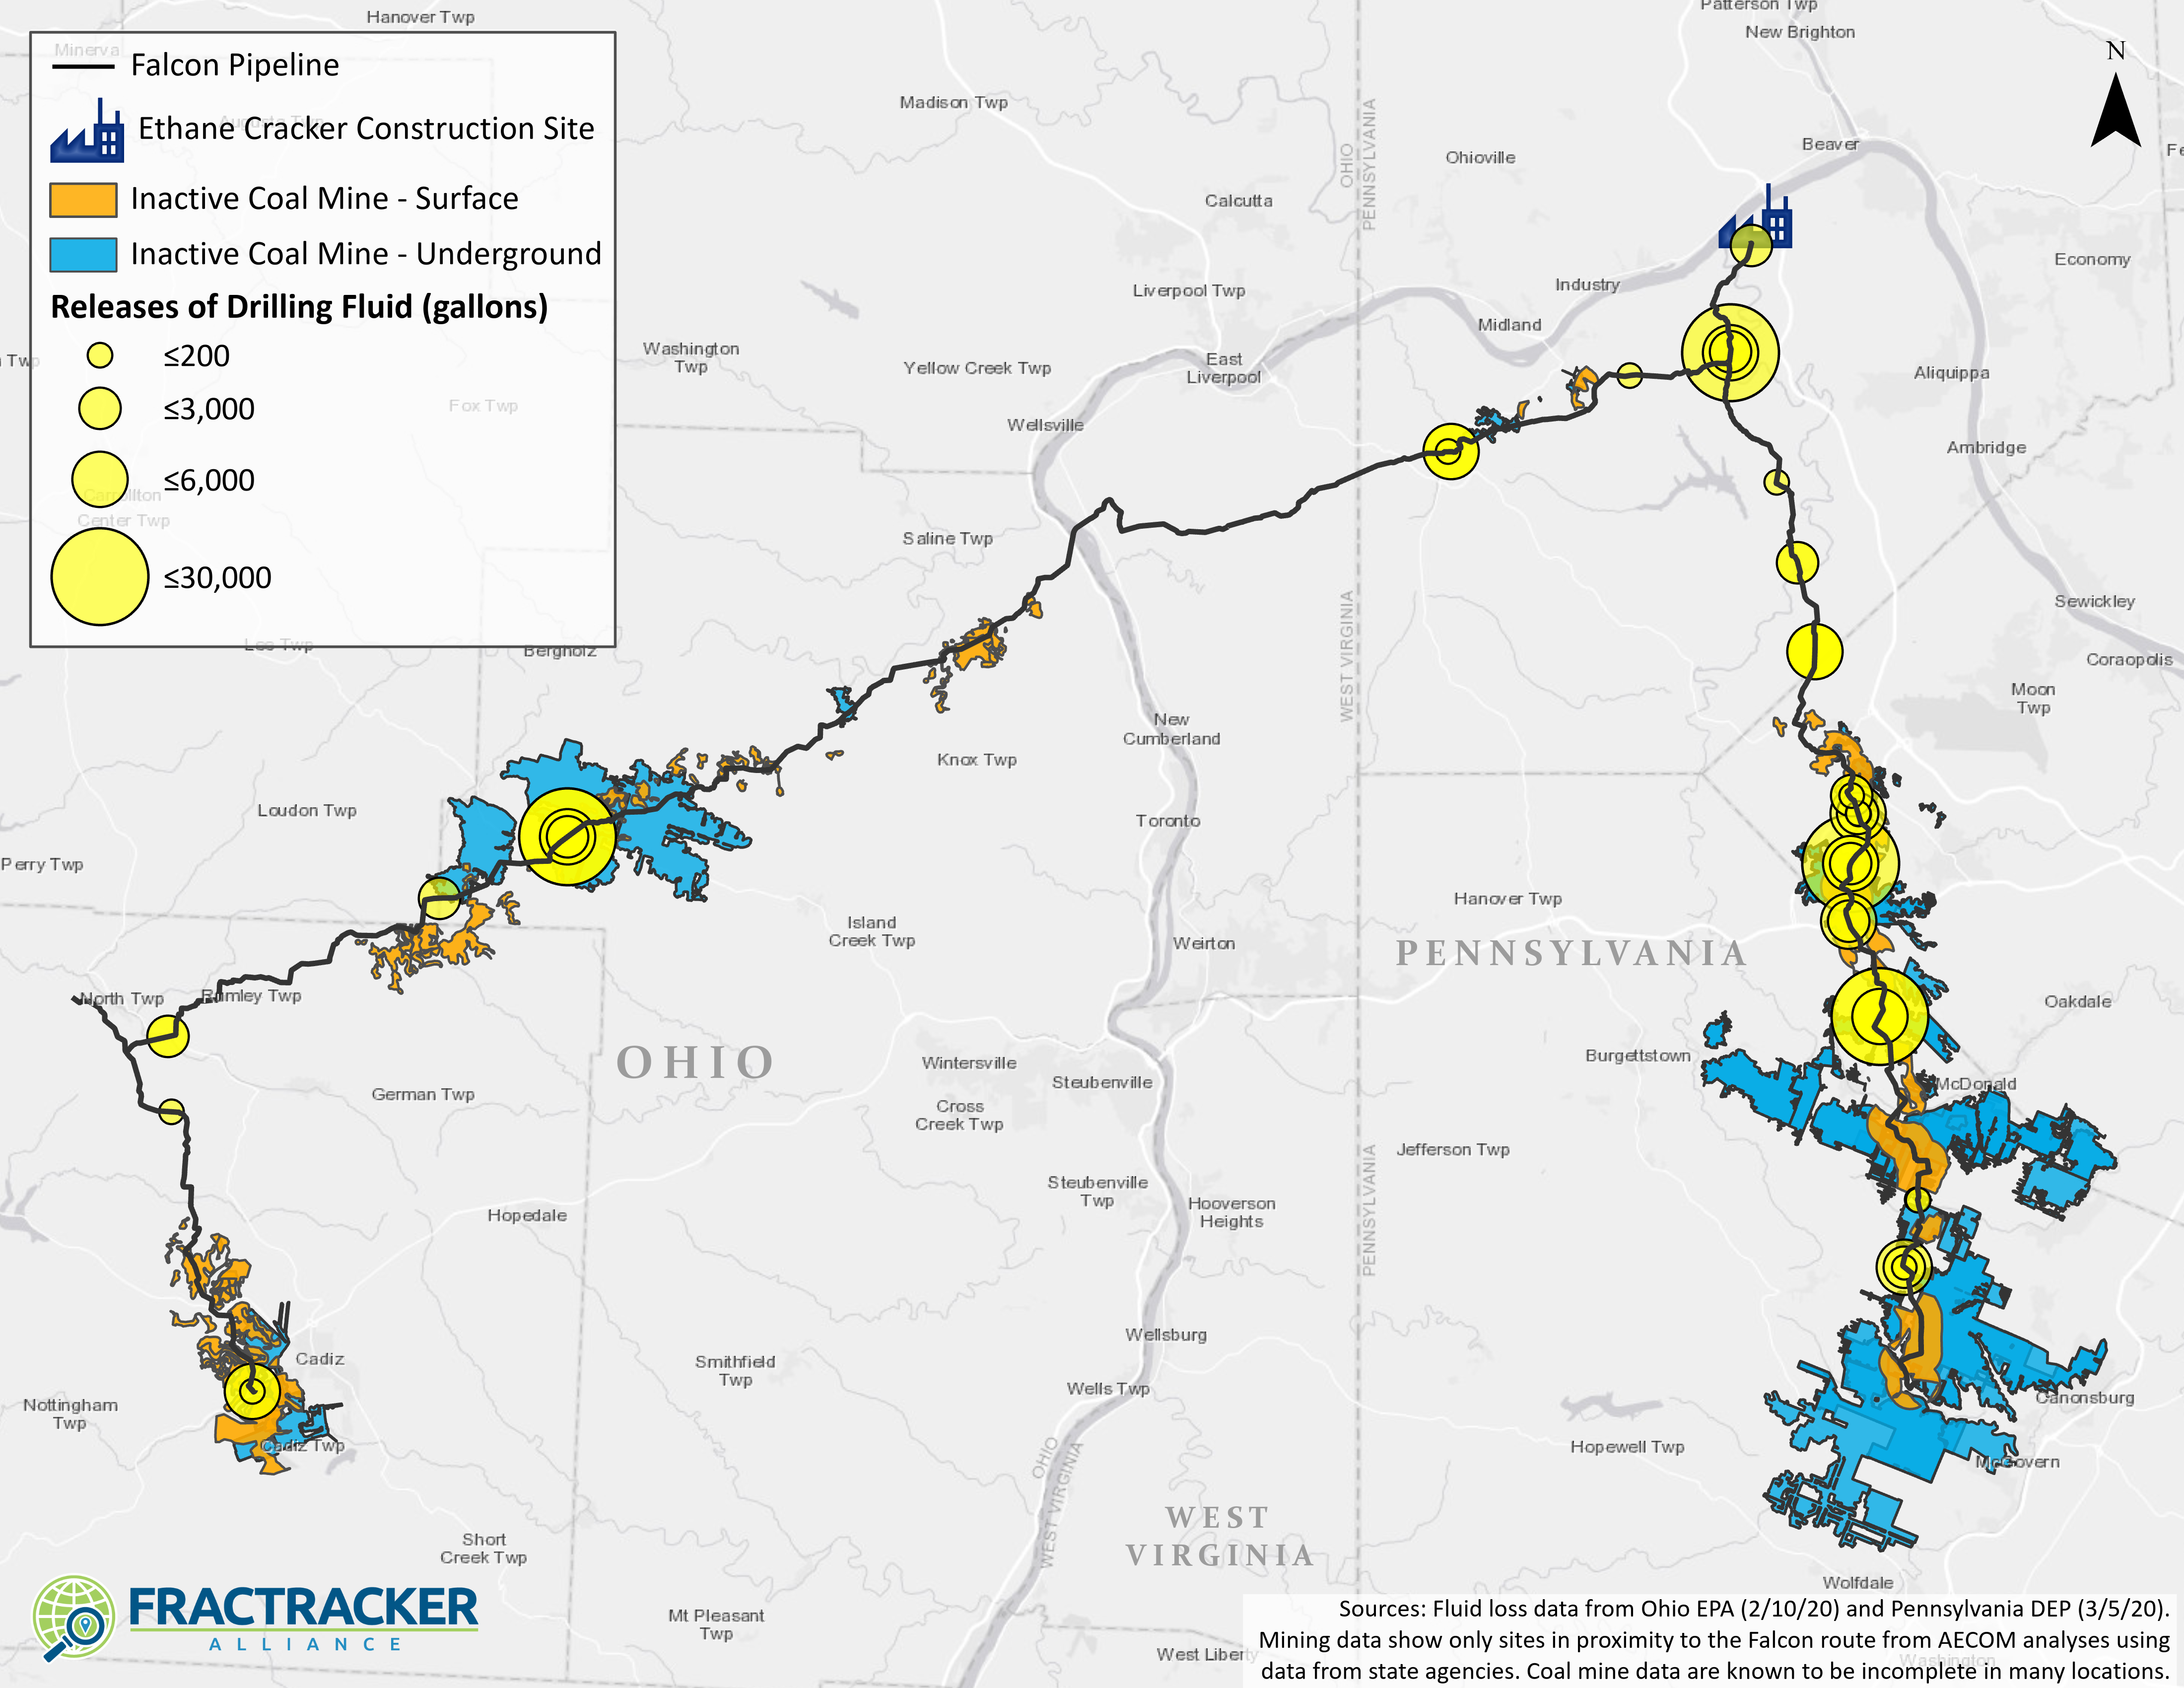 FracTracker map of the Falcon pipeline path, ethane cracker construction, inactive coal mine locations, and sites of drilling fluid releases